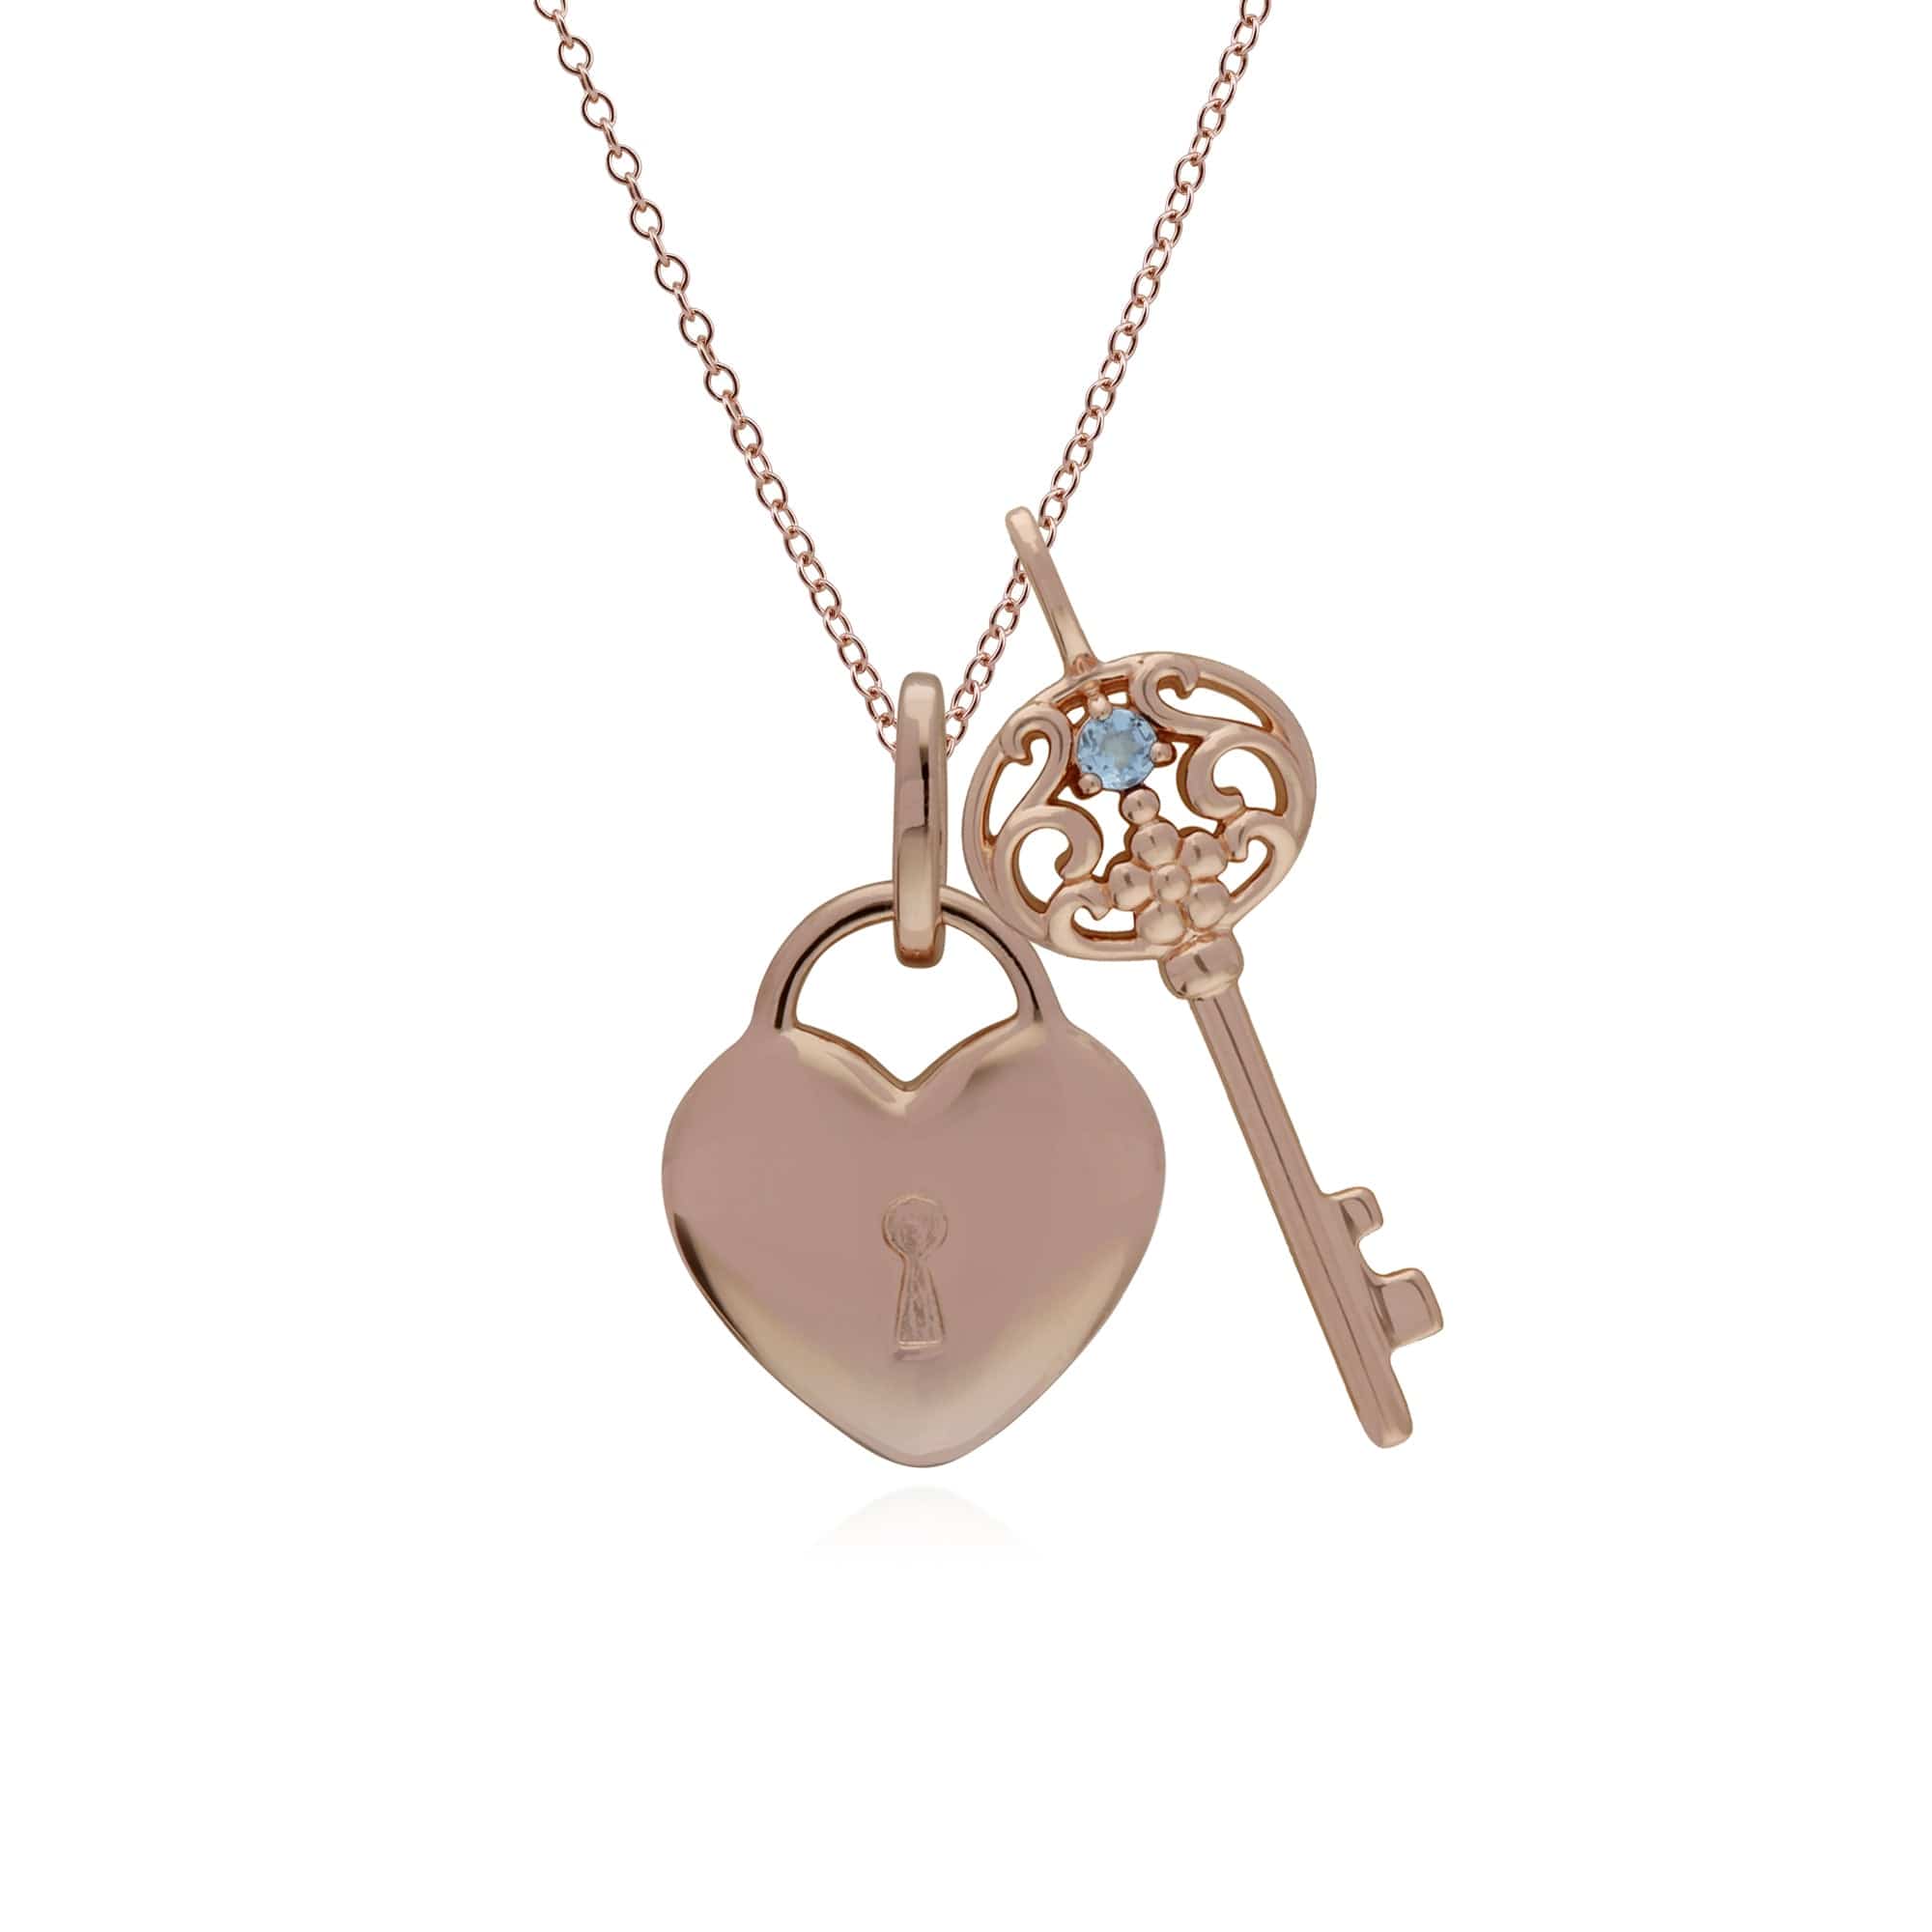 270P026710925-270P026901925 Classic Heart Lock Pendant & Aquamarine Big Key Charm in Rose Gold Plated 925 Sterling Silver 1